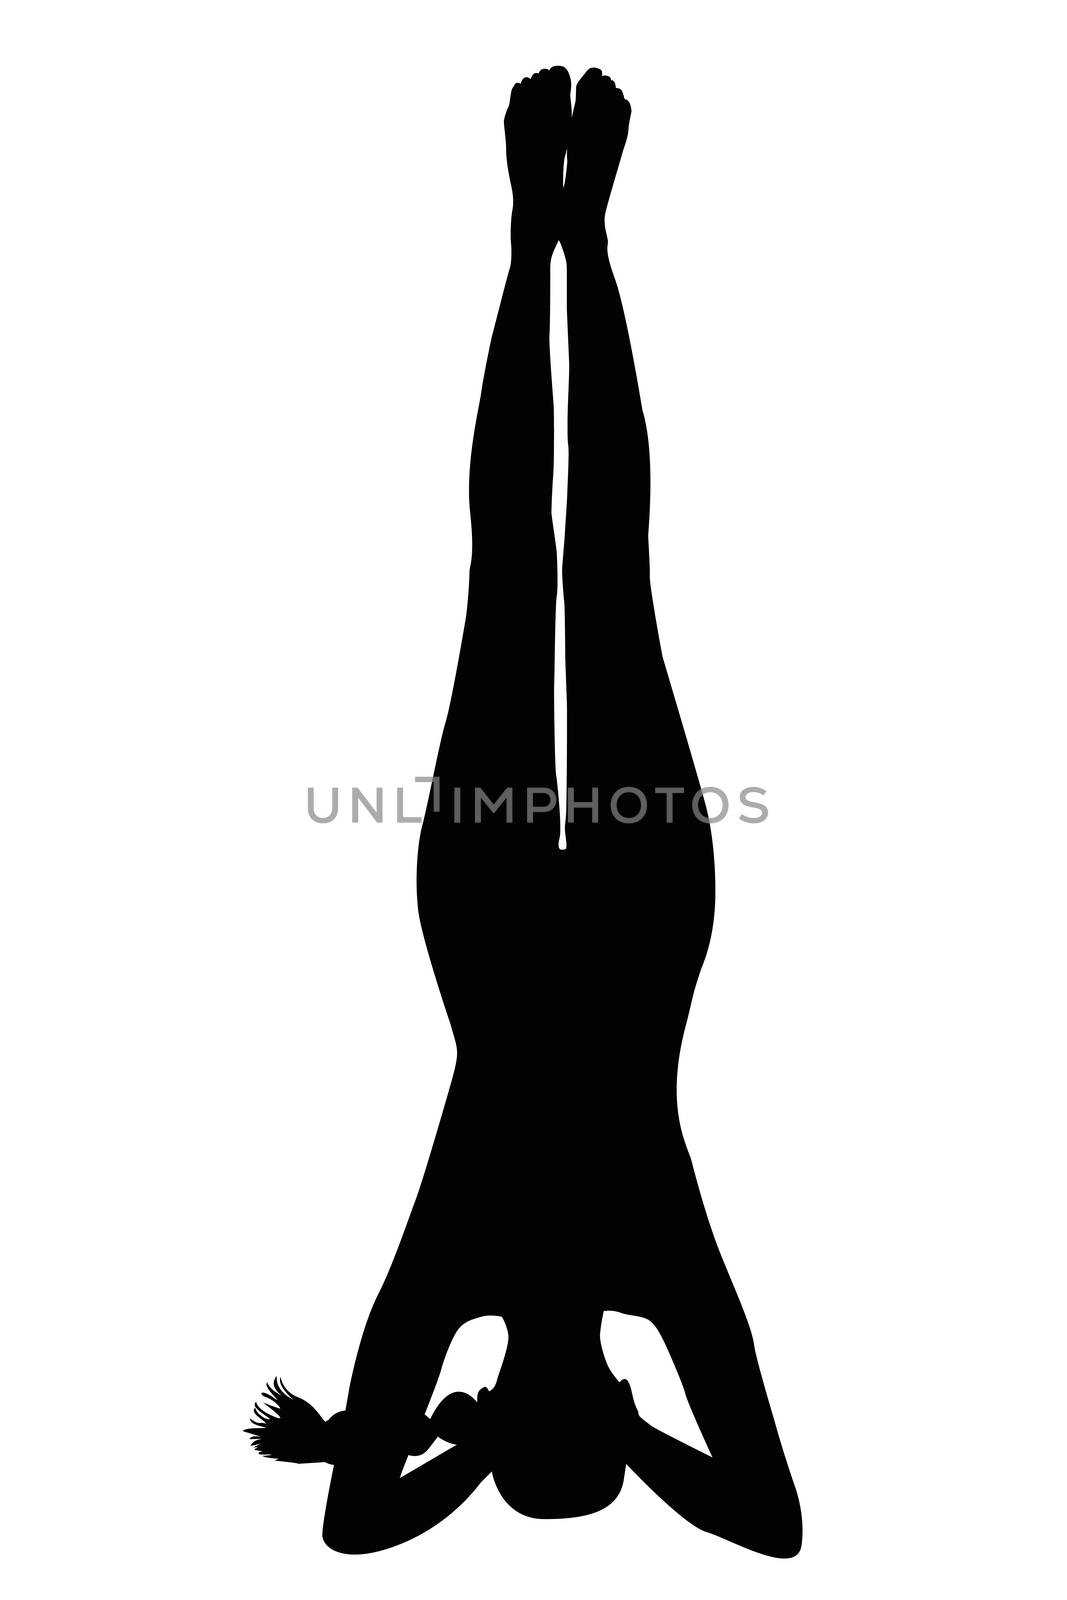 Silhouette of woman in yoga pose by hibrida13